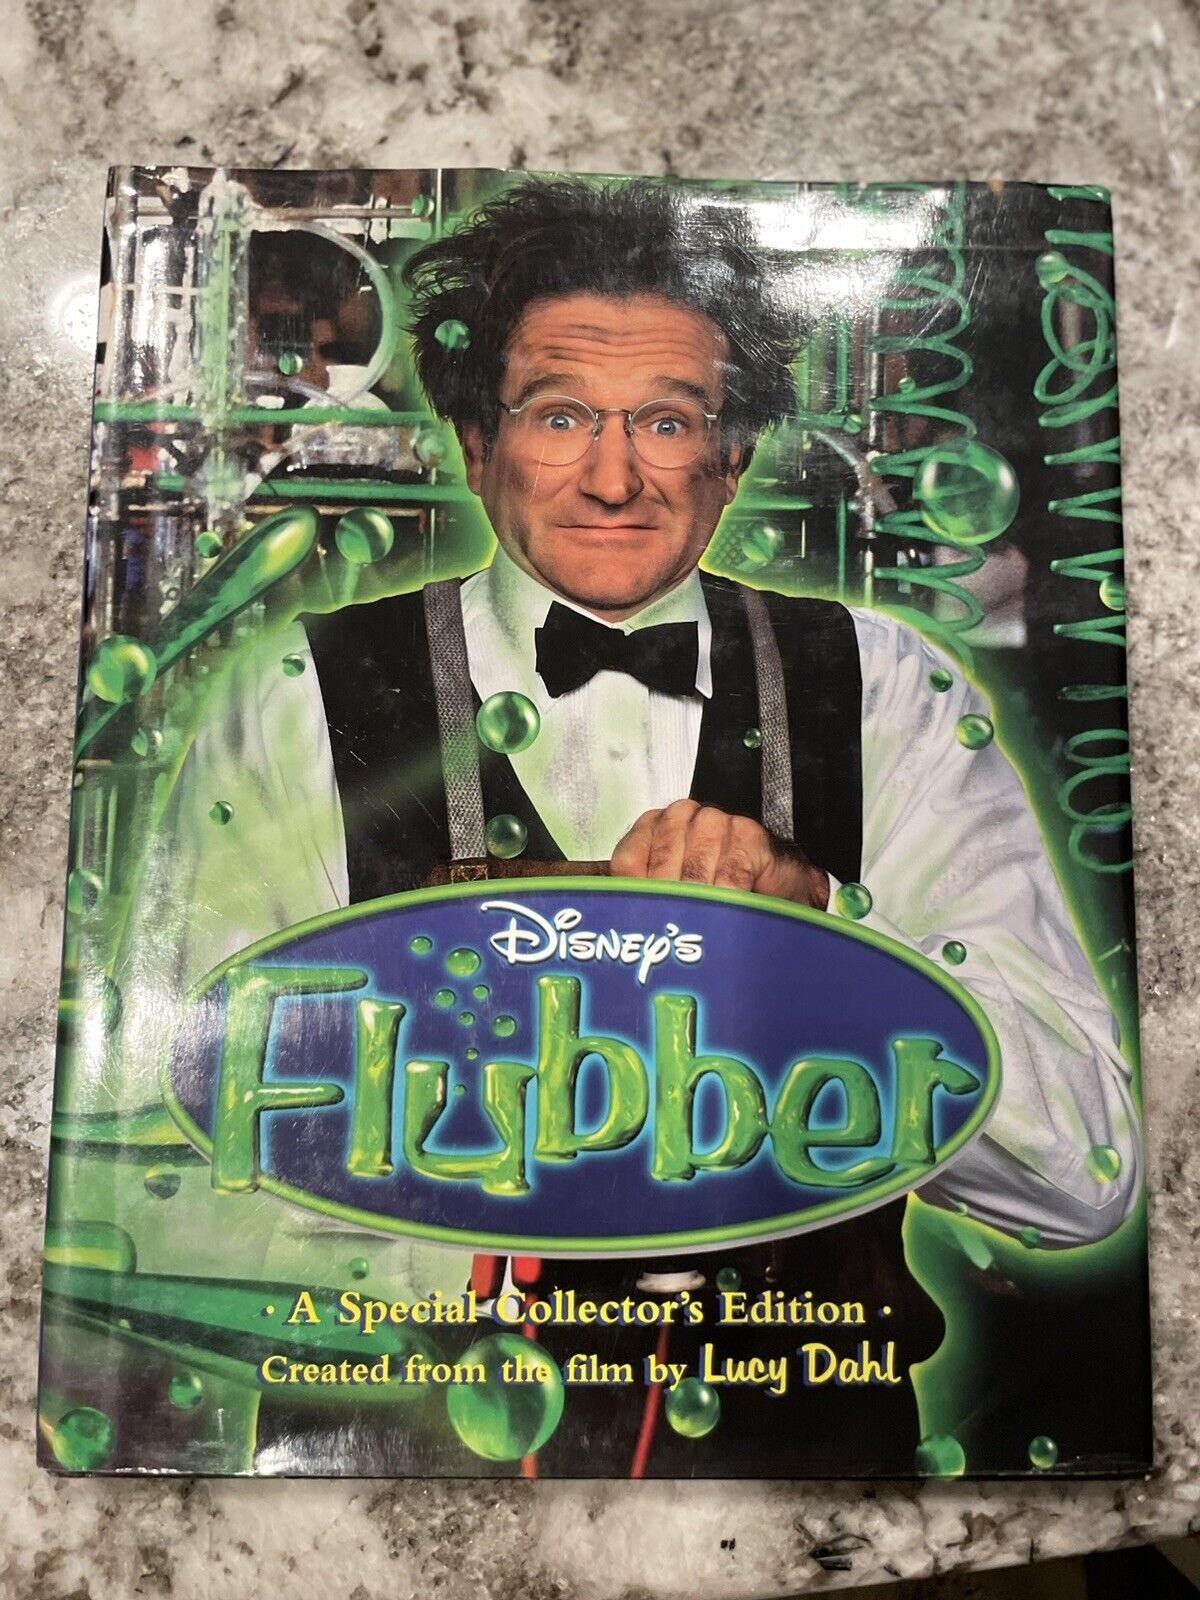 Special Collector's Edition Robin Williams in Disney's Flubber Book 1st Edition